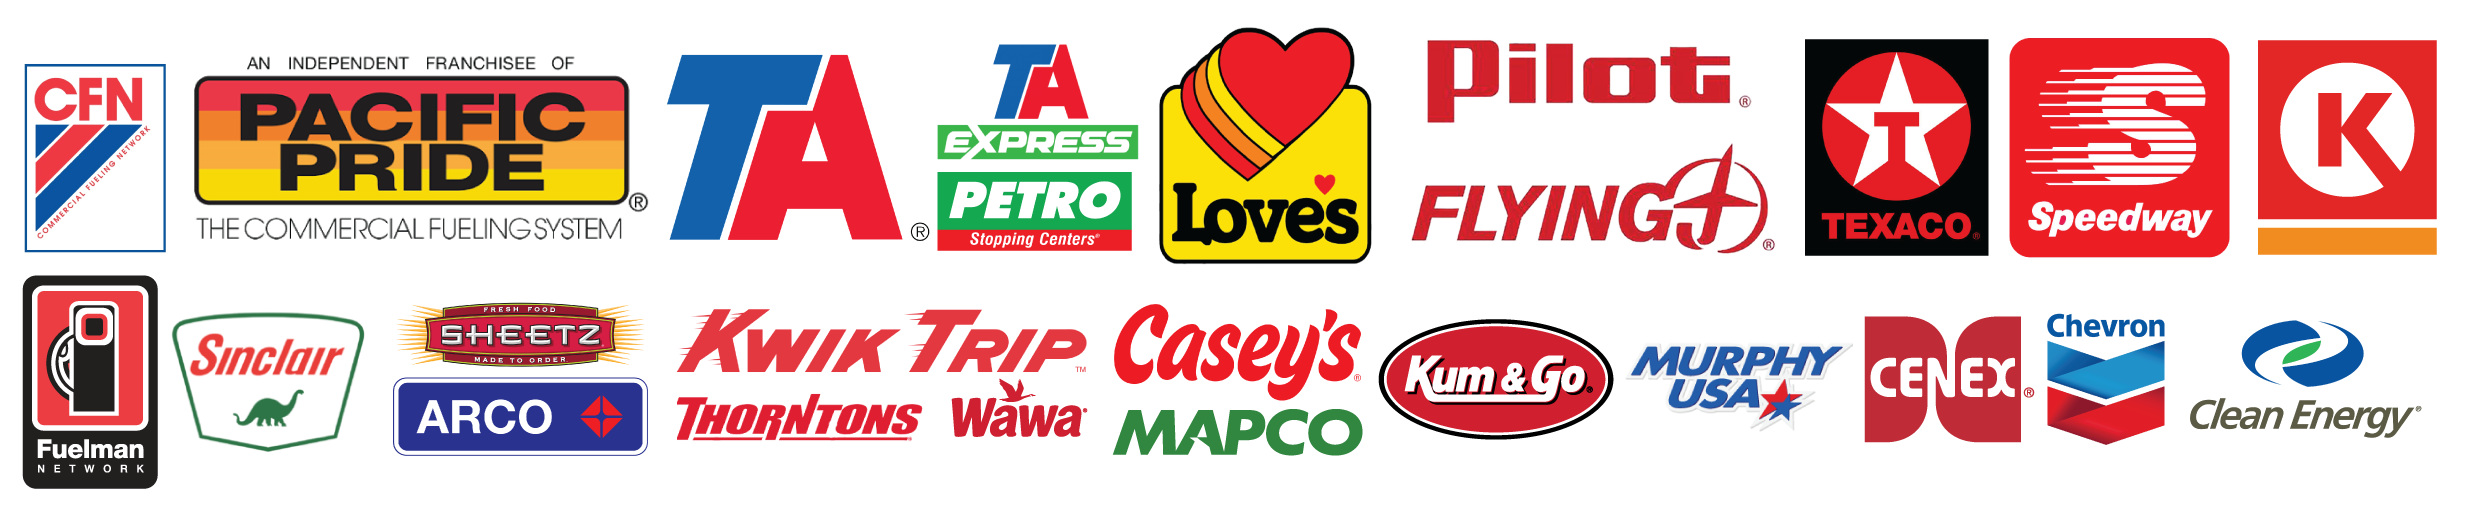 A collage of several logos of fuel and travel stop companies that participate in our fuel card program. The logos reading from left to right, top to bottom: Commerical Fueling Network (CFN), Pacific Pride, Travel Centers of America, TA Express, Petro Stopping Centers, Love's, Pilot, Flying J, Texaco, Speedway, Circle K, Fuel Network, Sinclair, Sheetz, Arco, Kwiktrip, Thorntons, Wawa, Casey's, MAPCO, Kum & Go, Murphy USA, Cenex, Chevron, and Clean Energy.